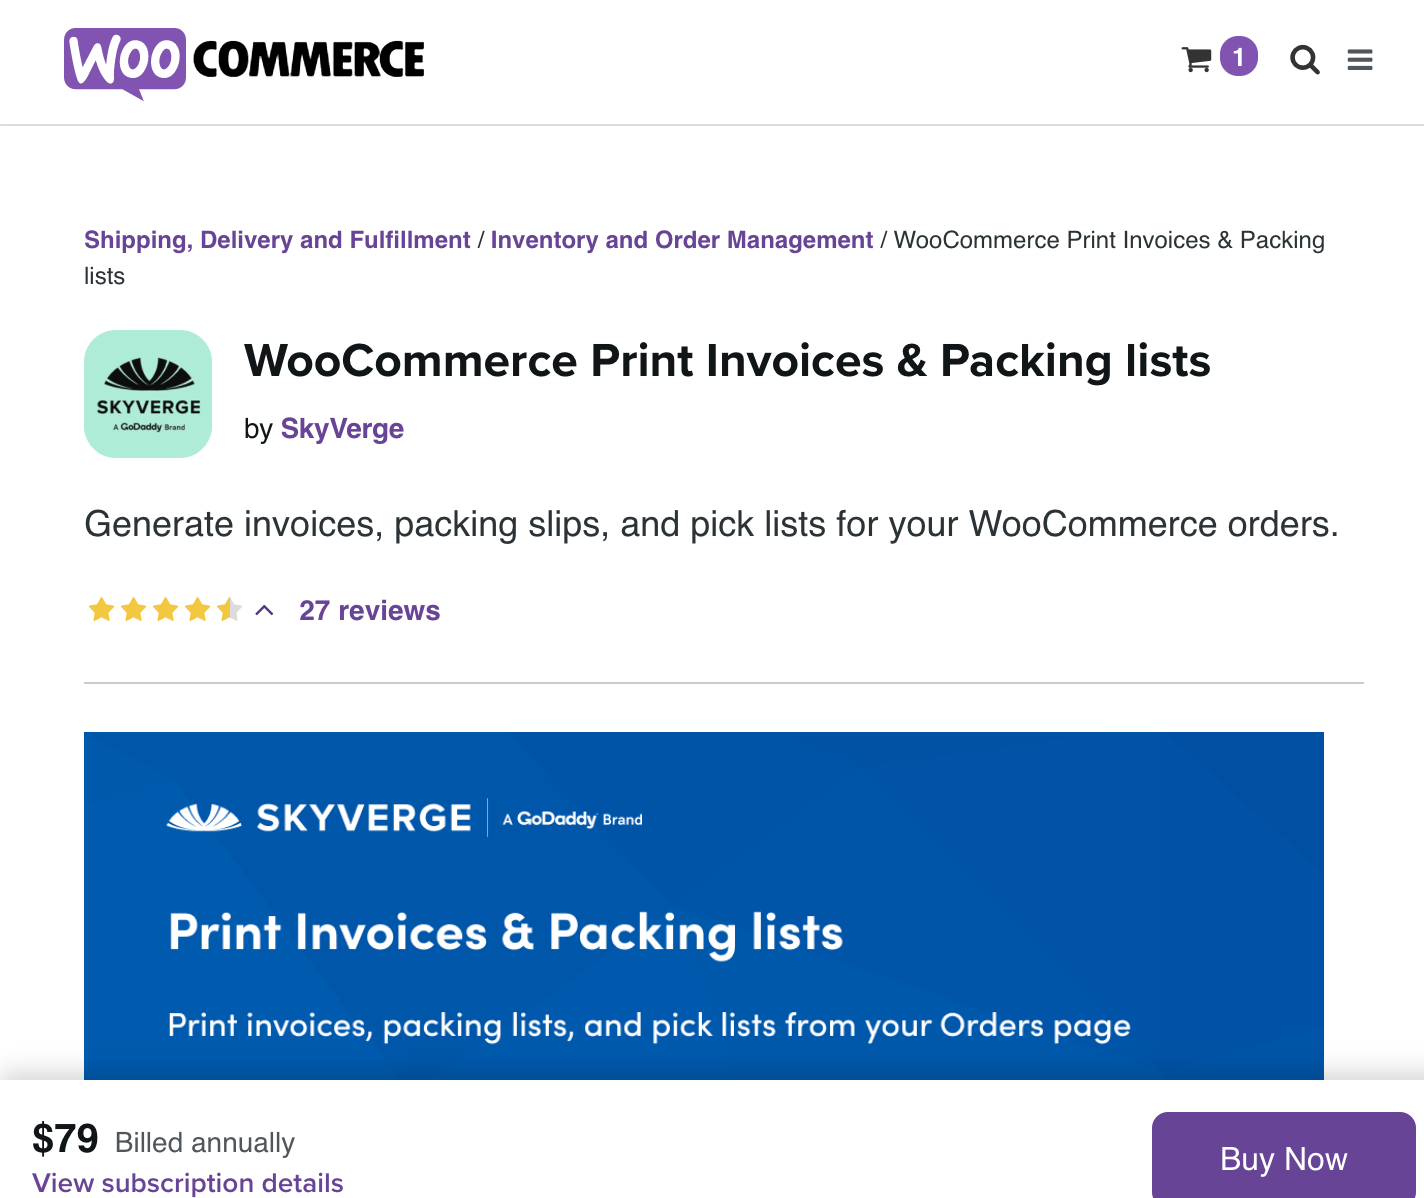 You can effortlessly print a customer's invoice to add in the package using this invoicing plugin